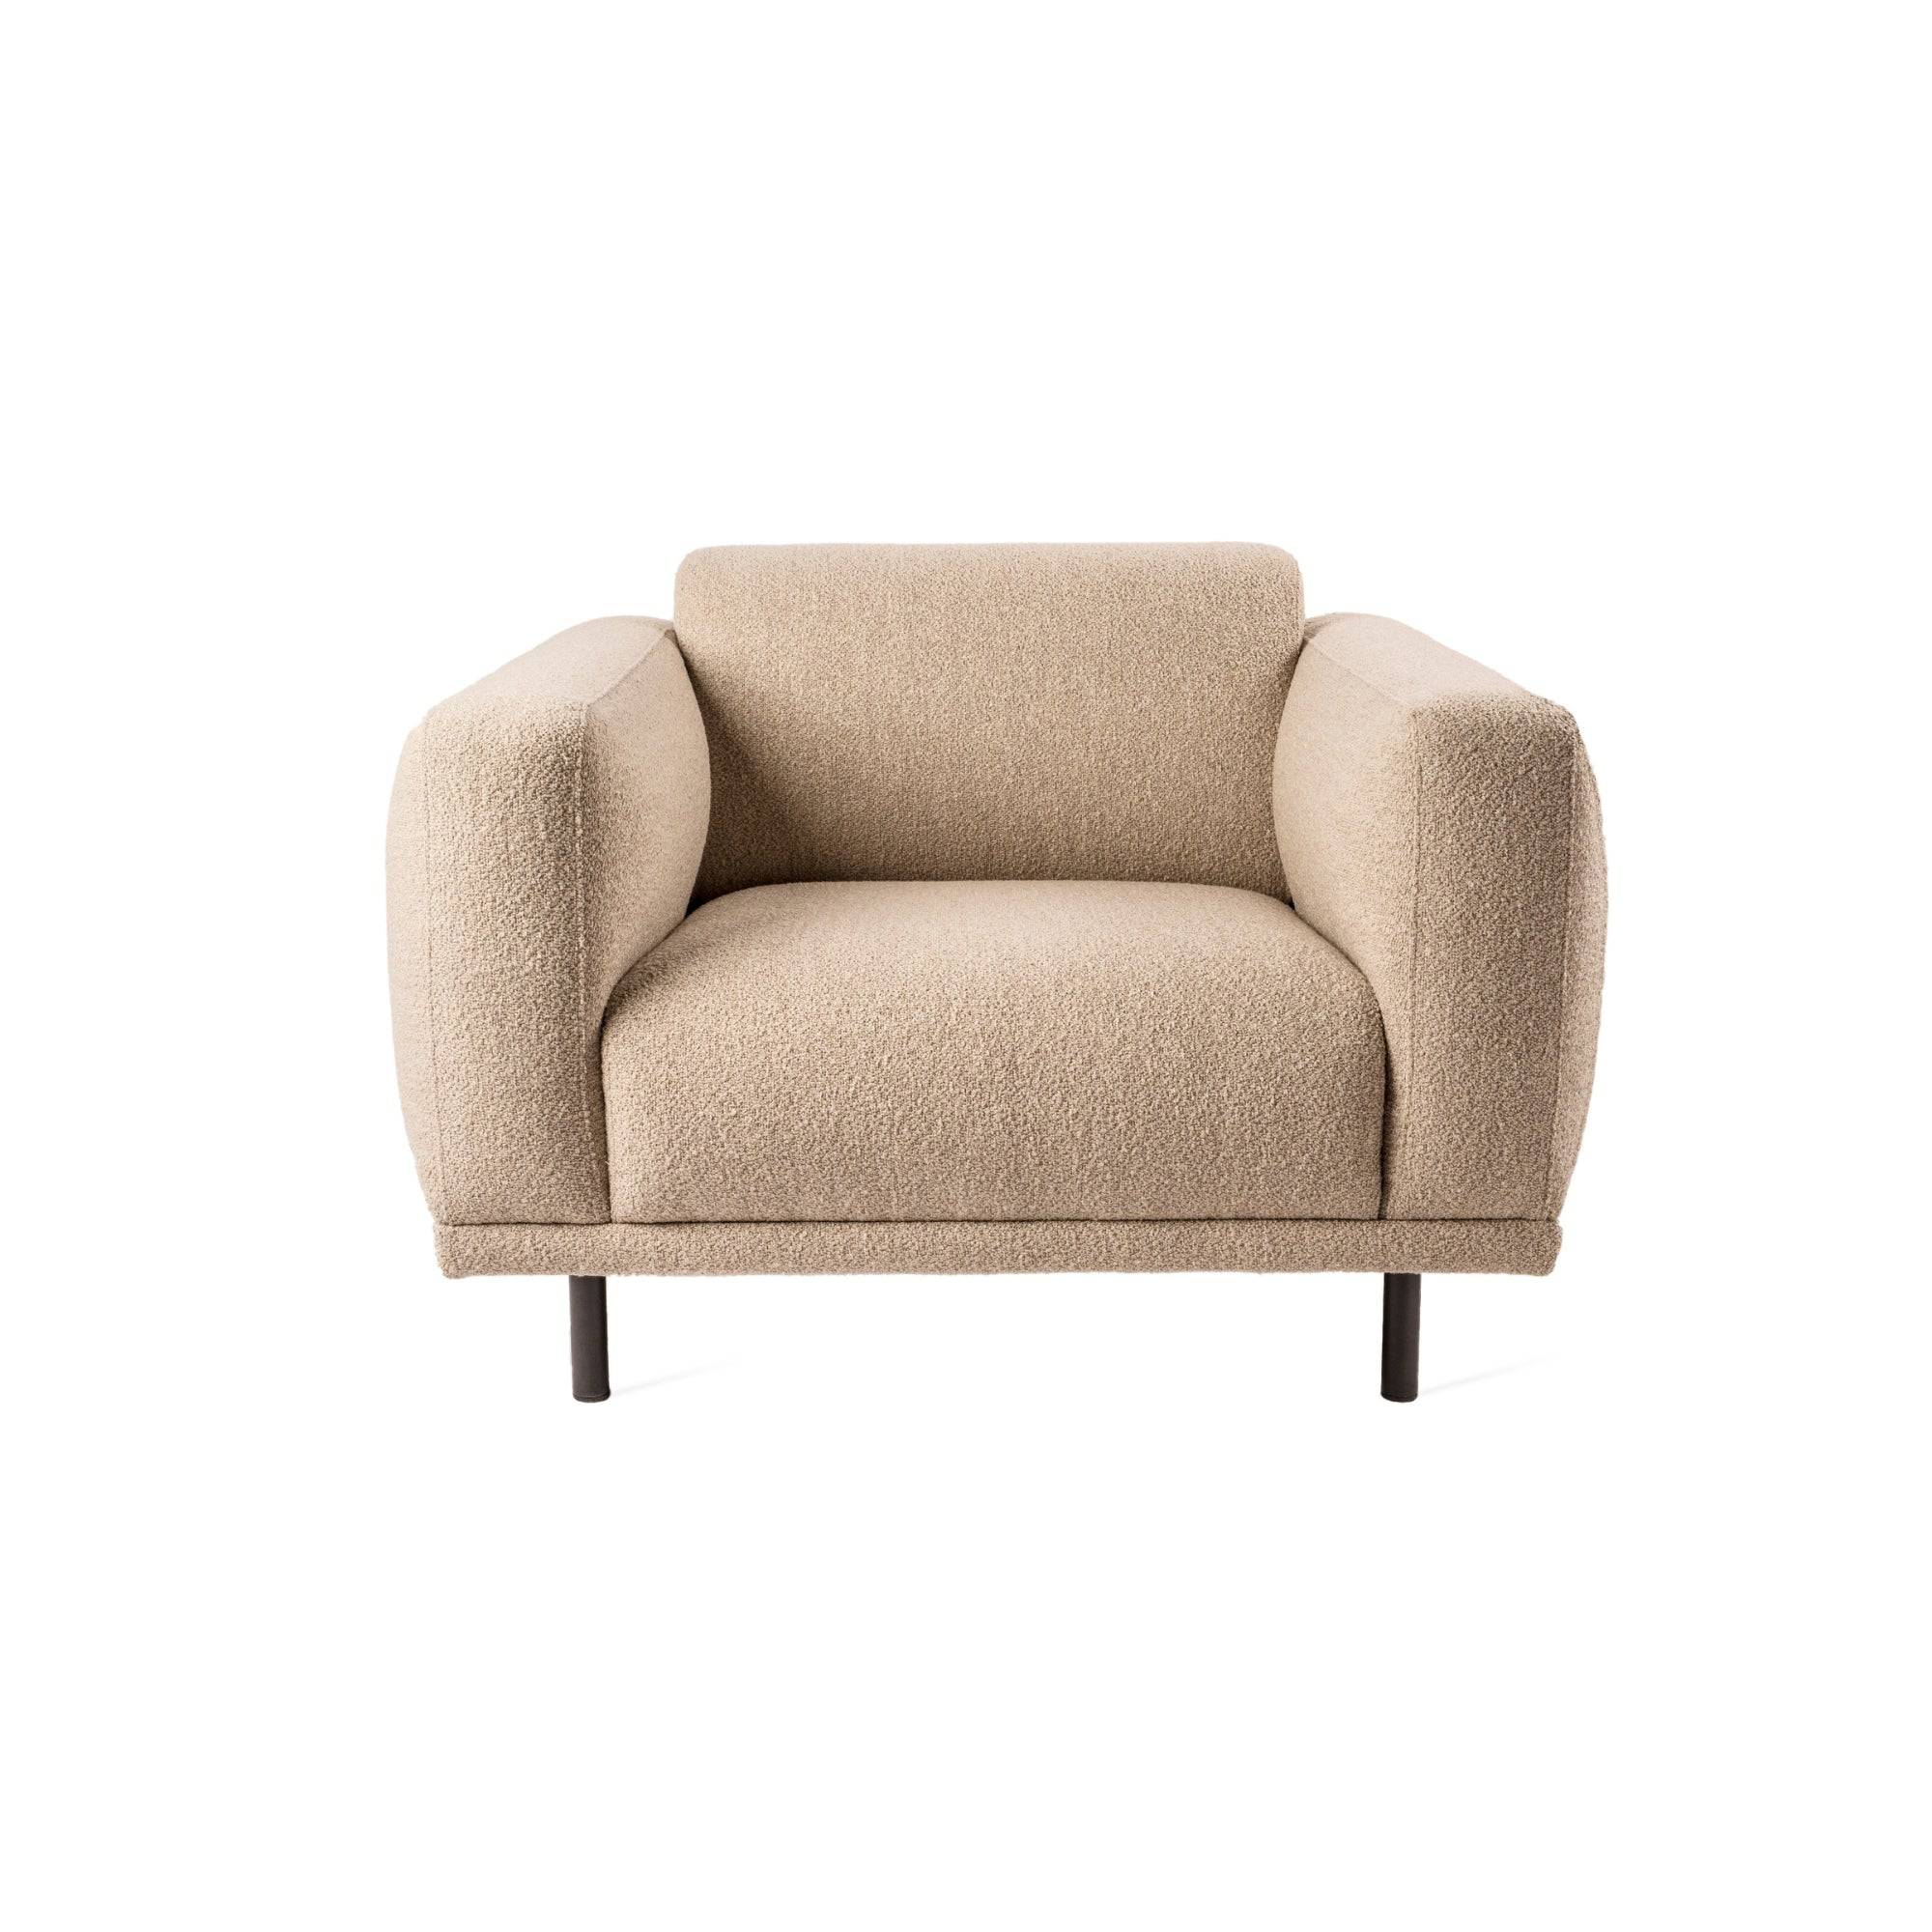 Teddy Lounge Chair - Beige - THAT COOL LIVING